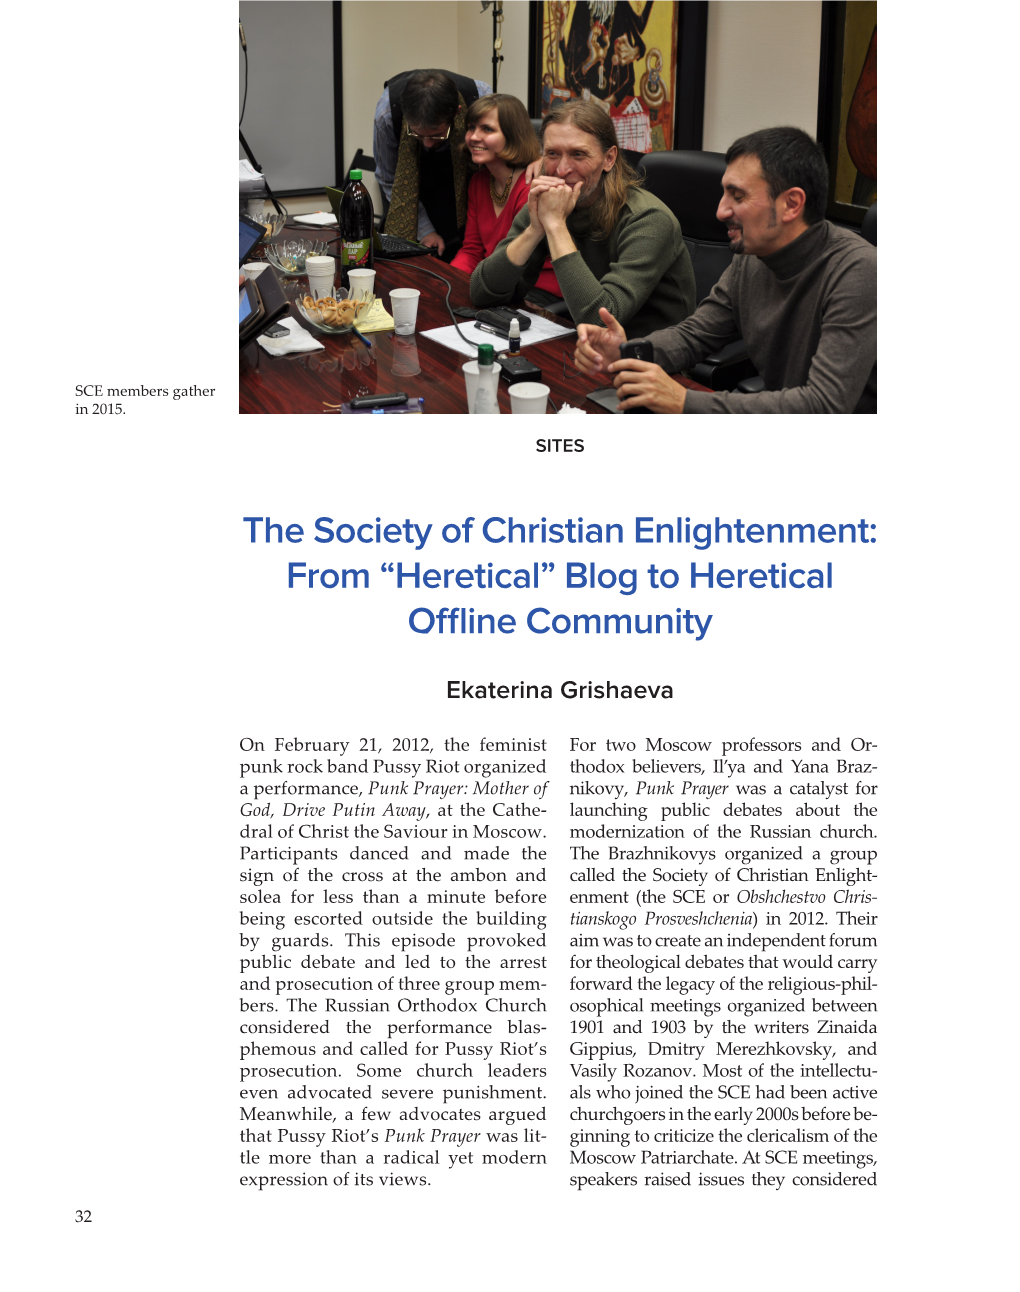 The Society of Christian Enlightenment: from “Heretical” Blog to Heretical Offline Community